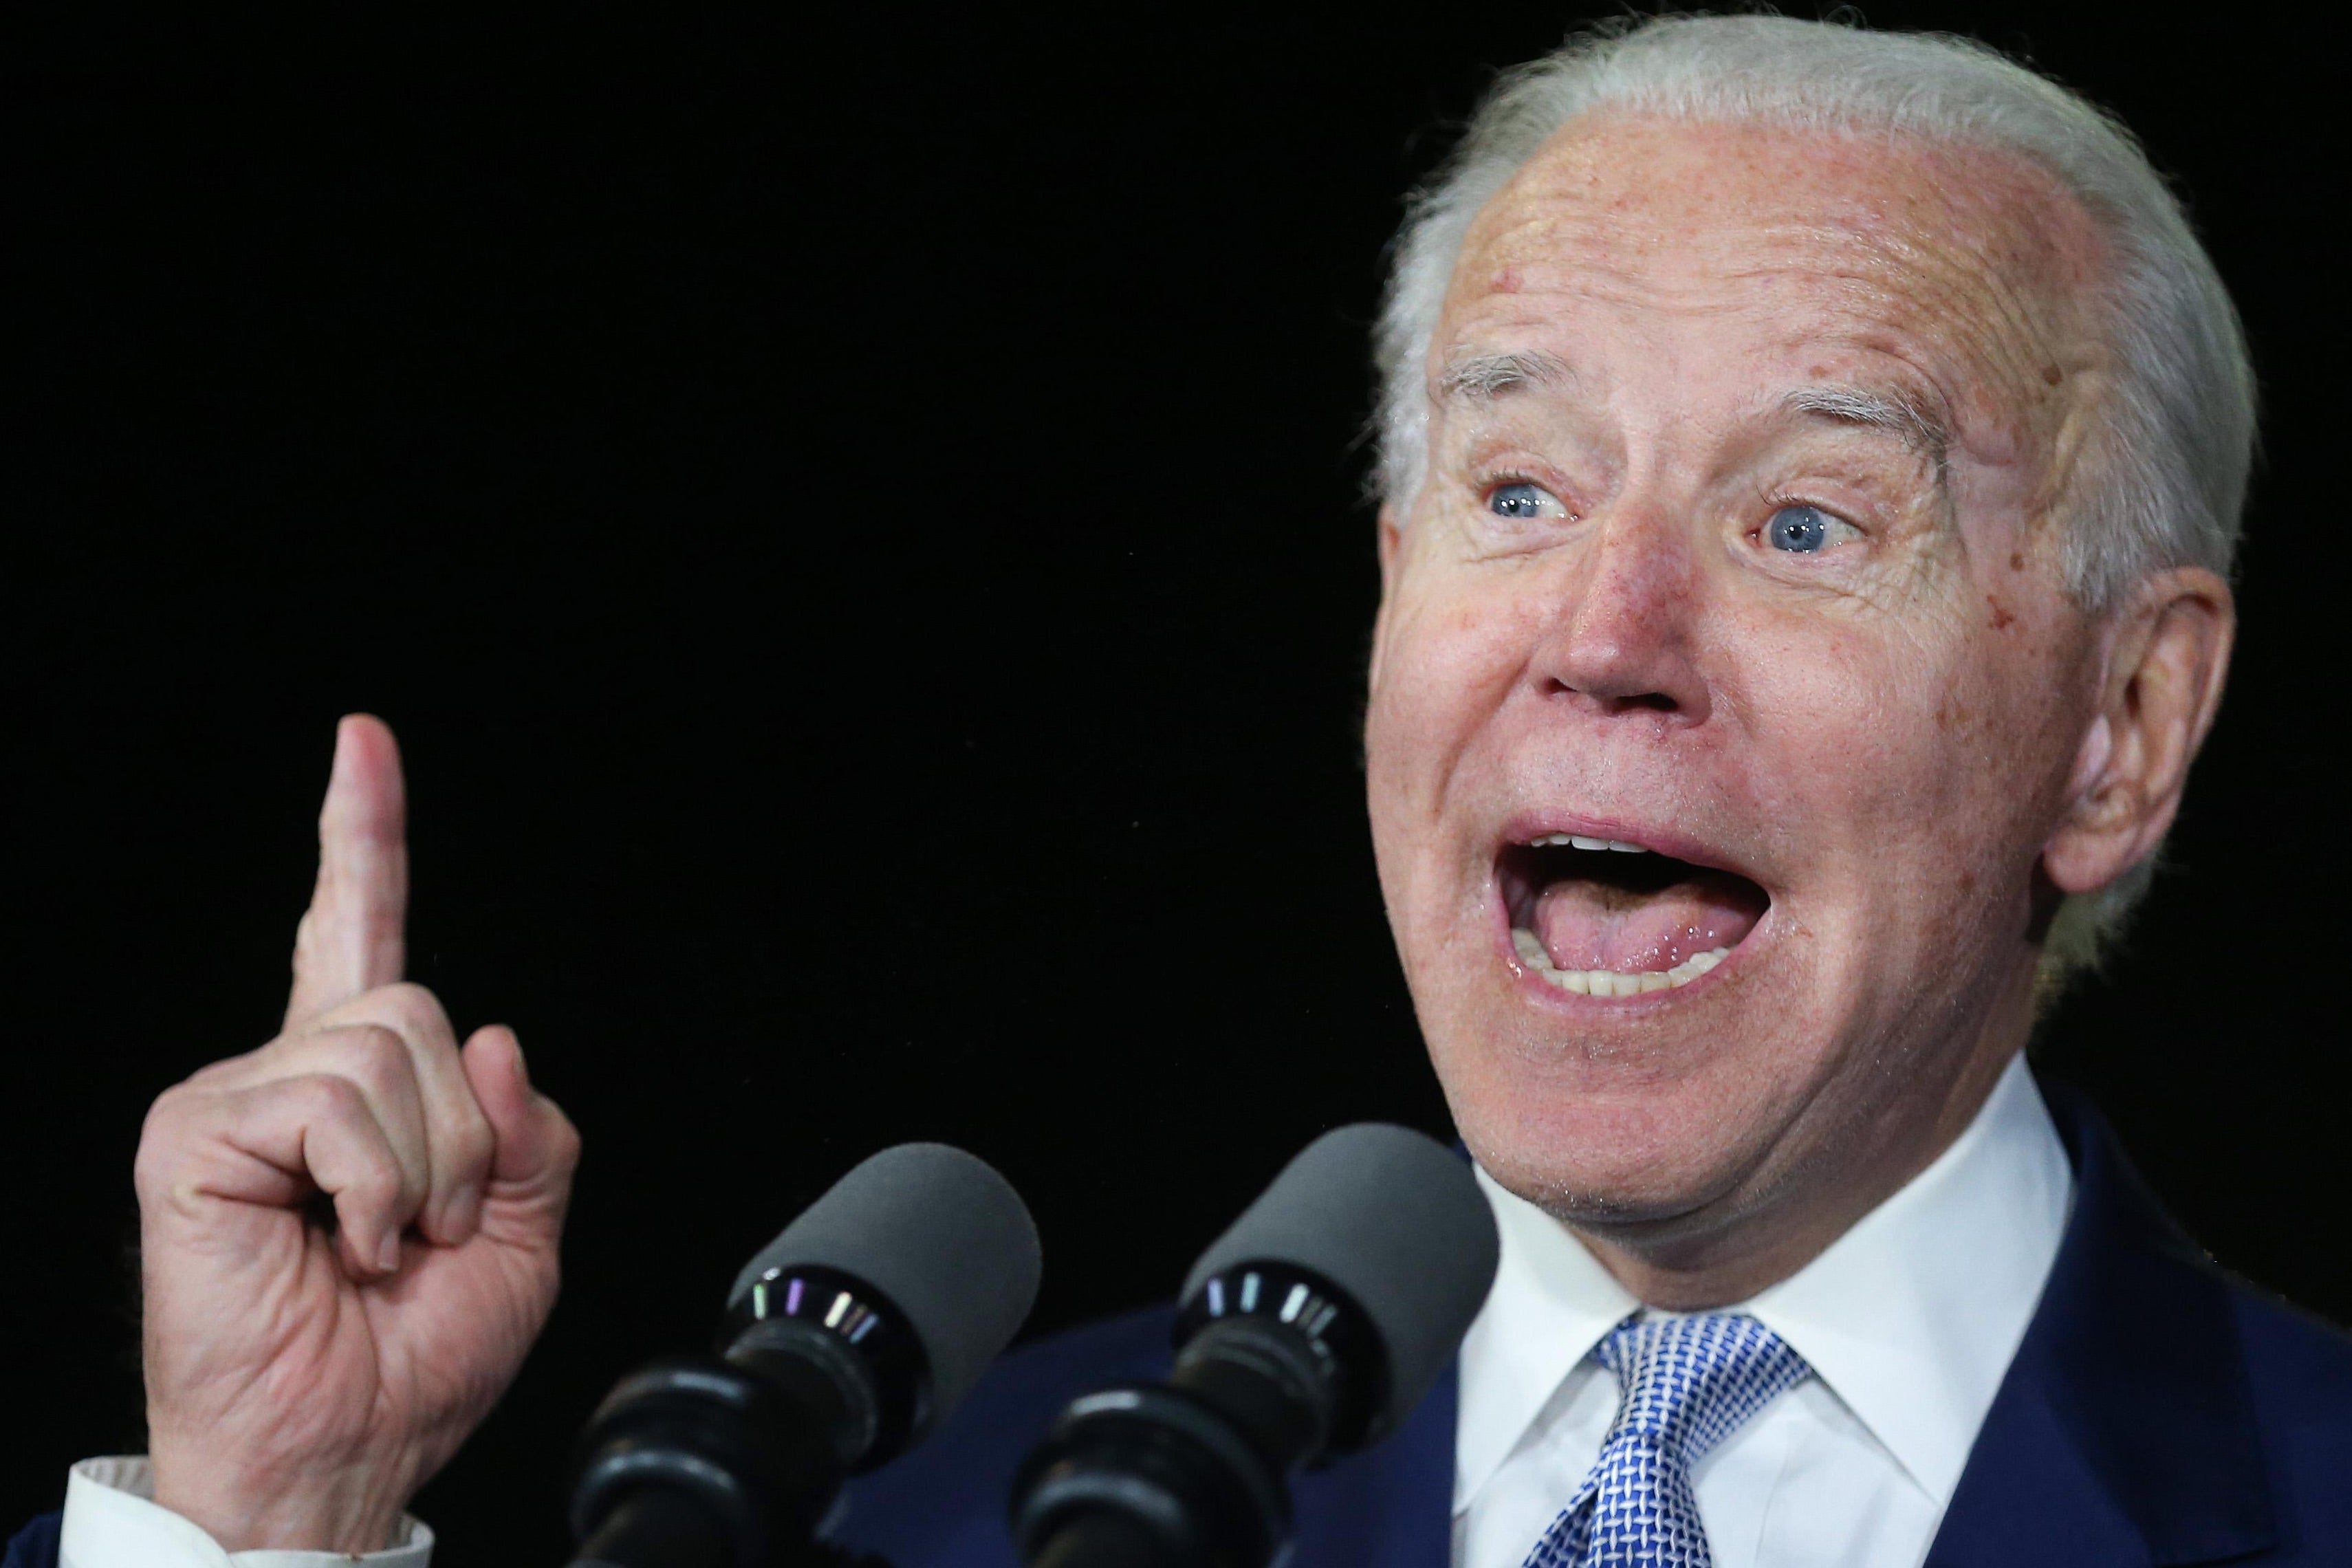 Joe Biden stands in front of a microphone with mouth agape.